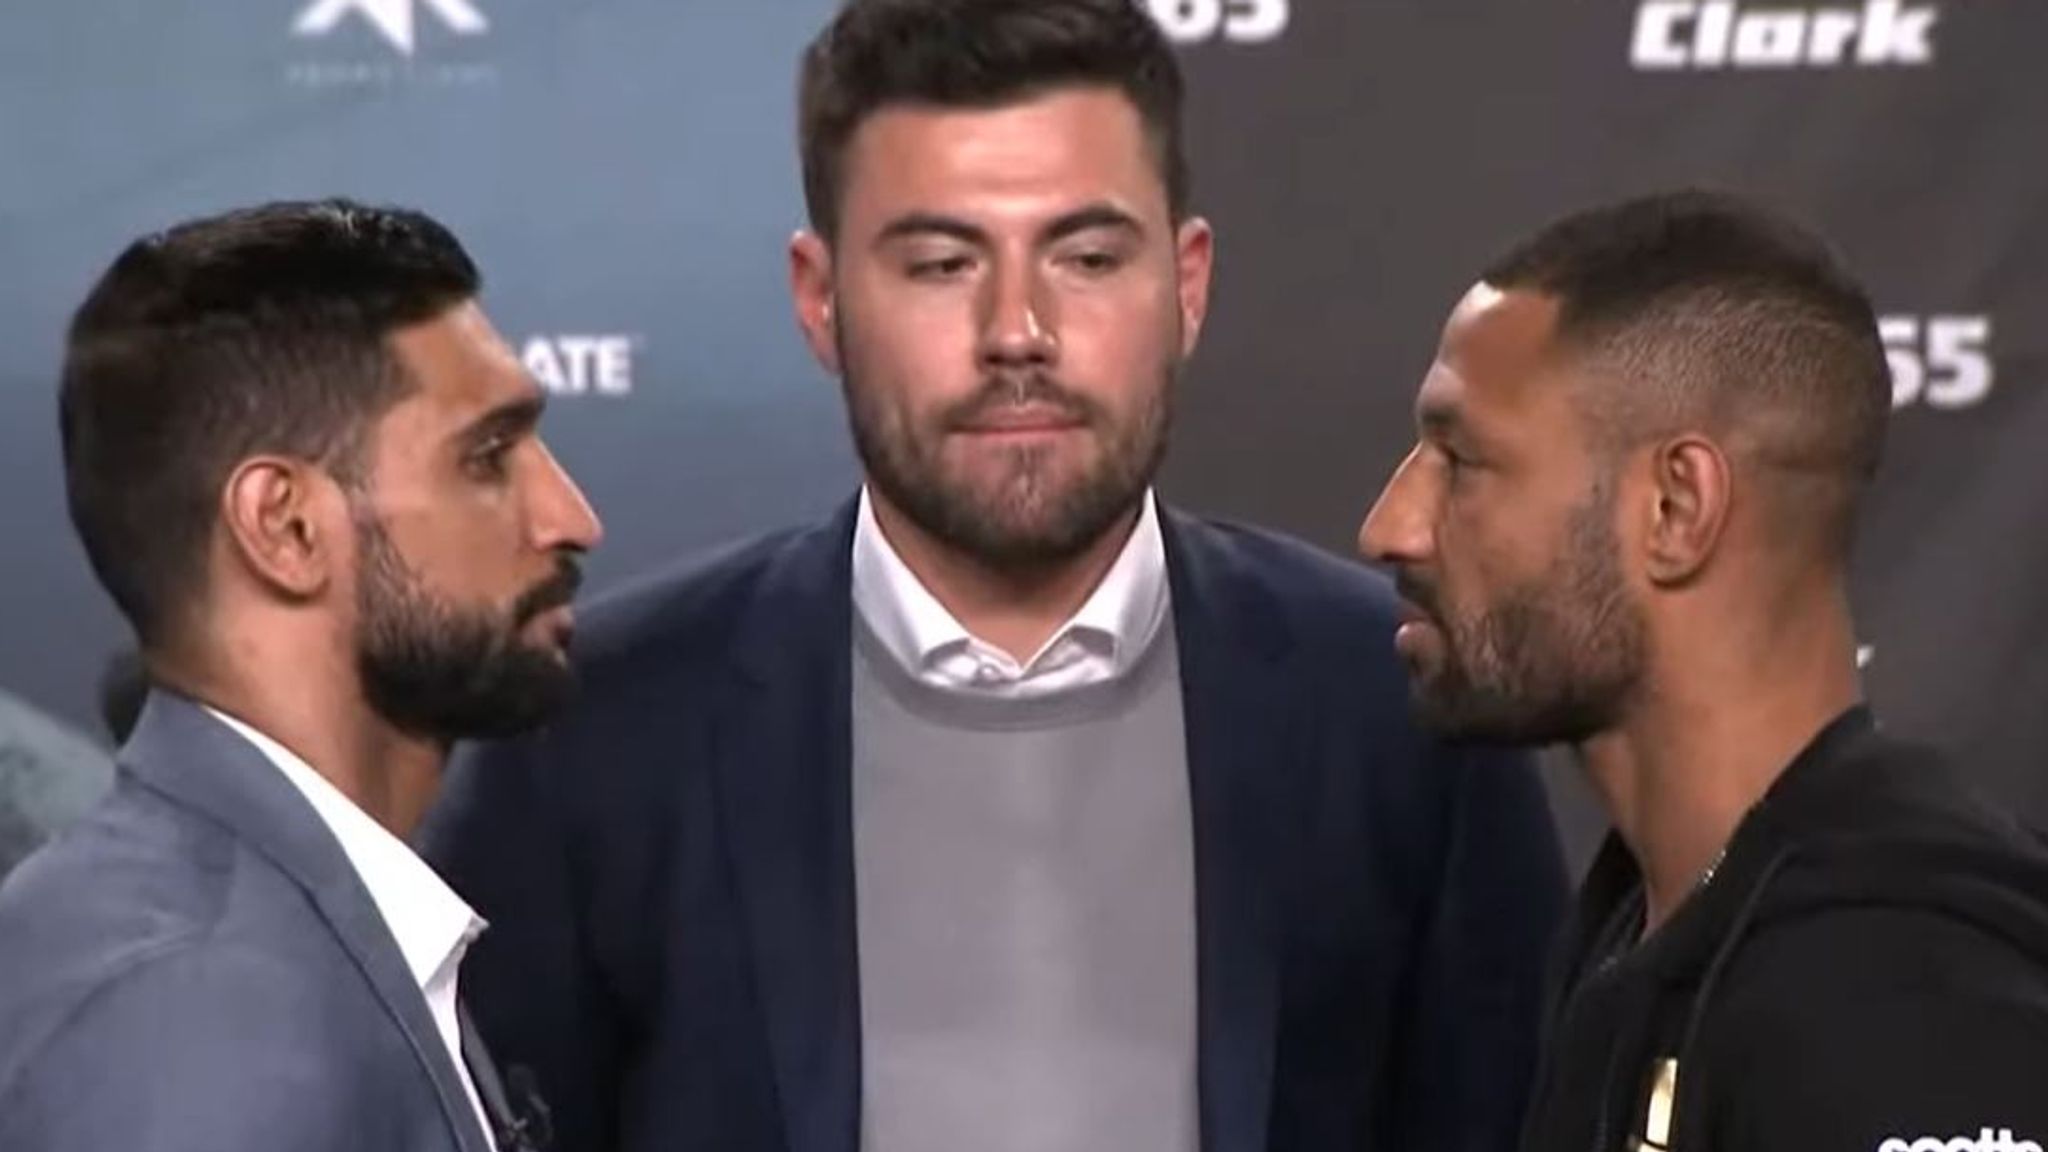 Amir Khan and Kell Brook deny using racist and homophobic language during pre-fight press conference Boxing News Sky Sports